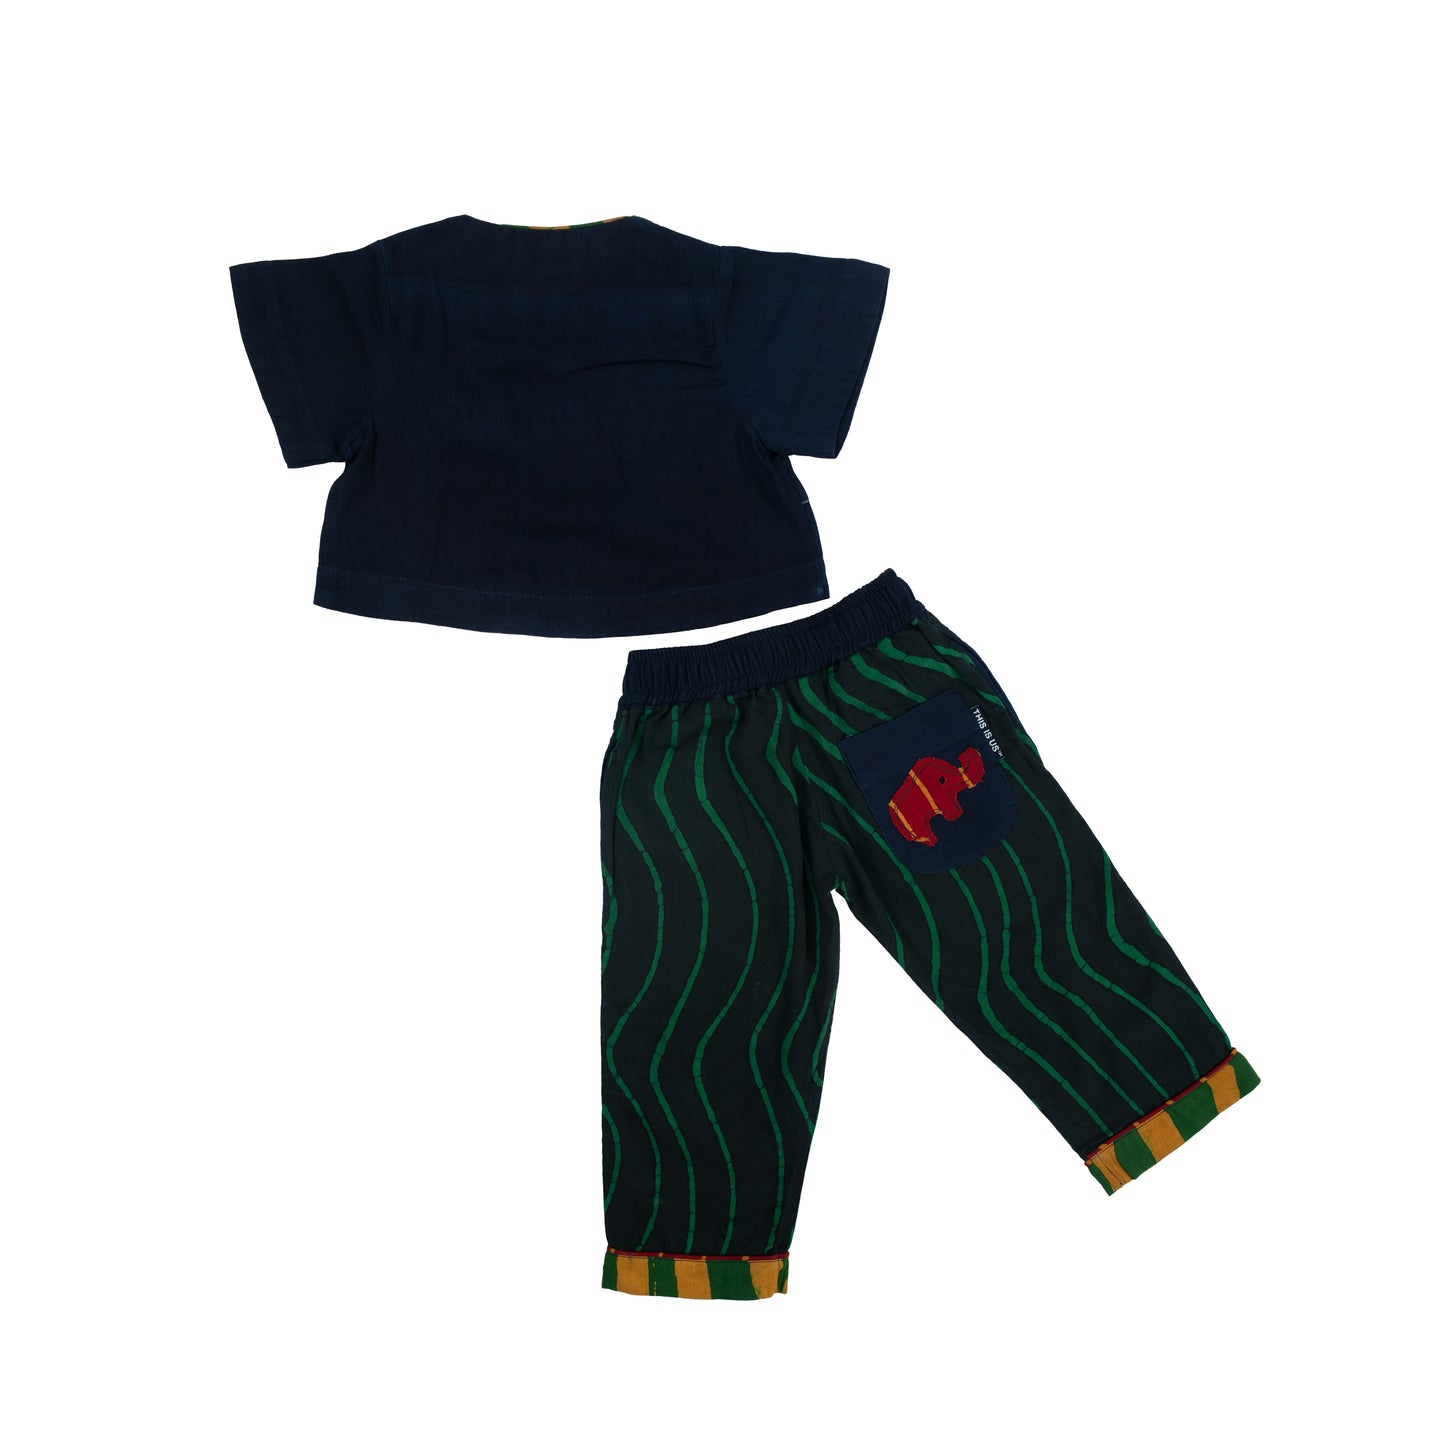 This Is Us is Dye Lab Together Minis Trouser Set